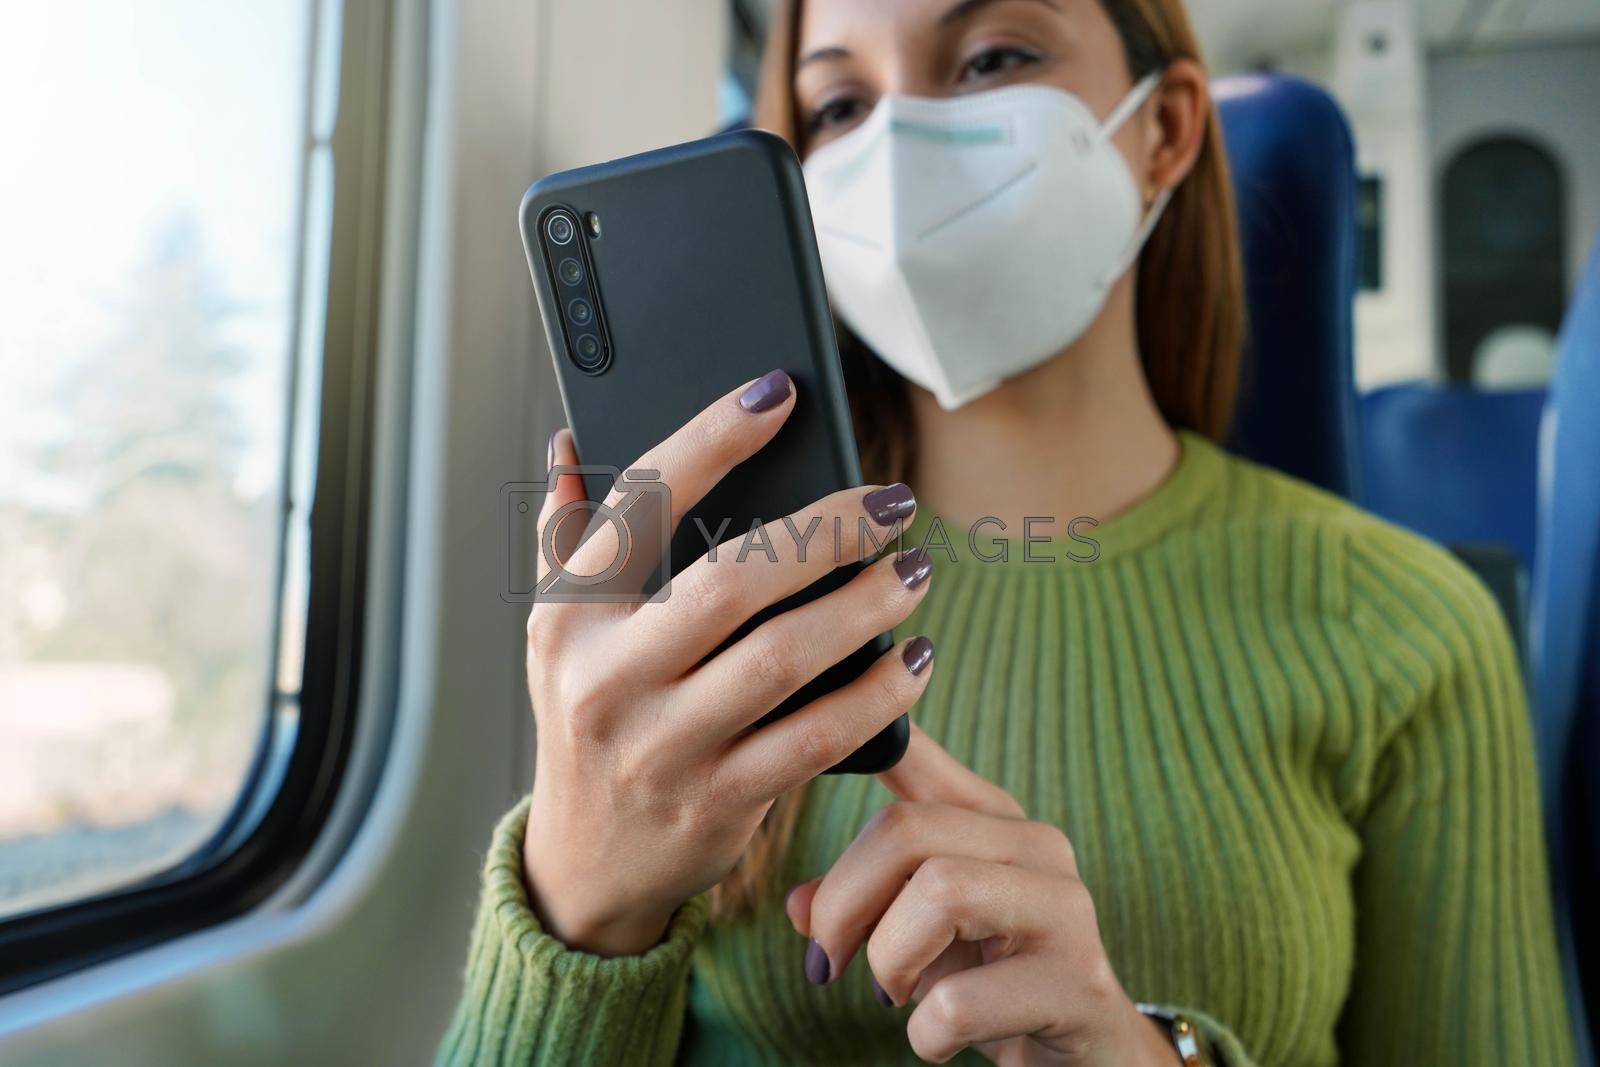 Train passenger using smartphone app during travel commute wearing protective face mask. Focus on the phone.